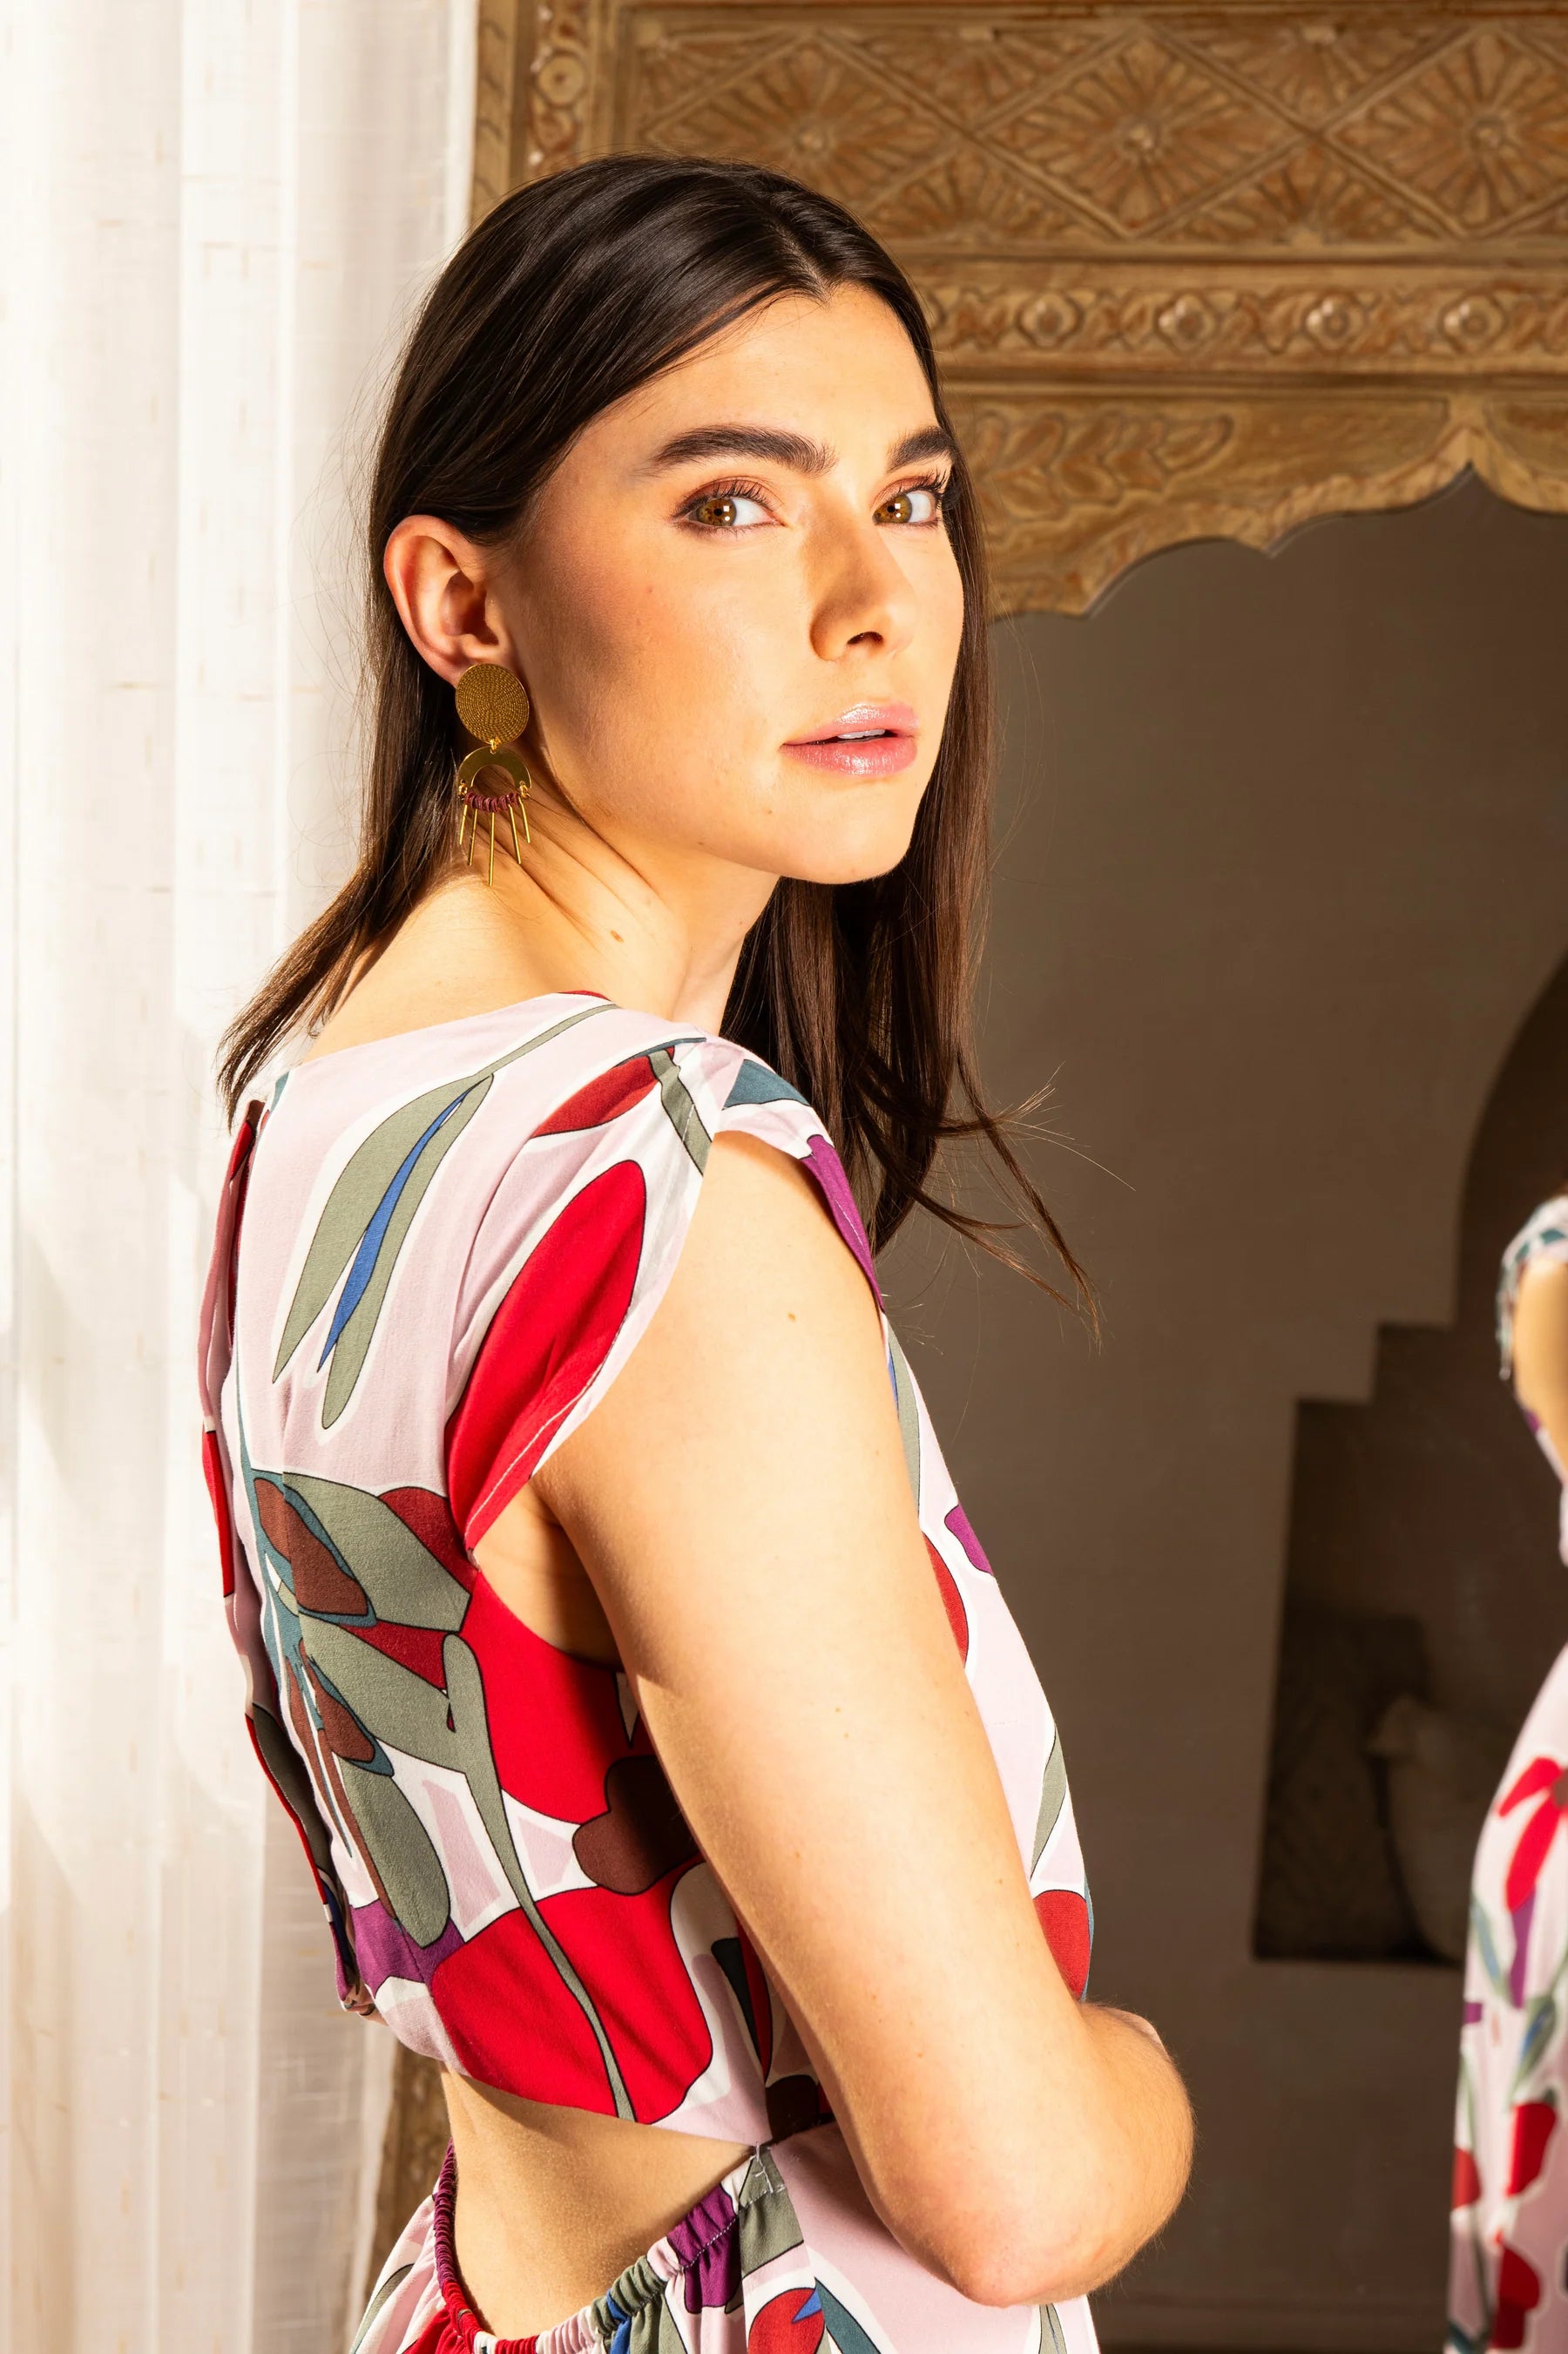 Side view close-up photo of a woman wearing the Maree Dress by Cherry Bobin, featuring a pink floral pattern, standing in front of a mirror